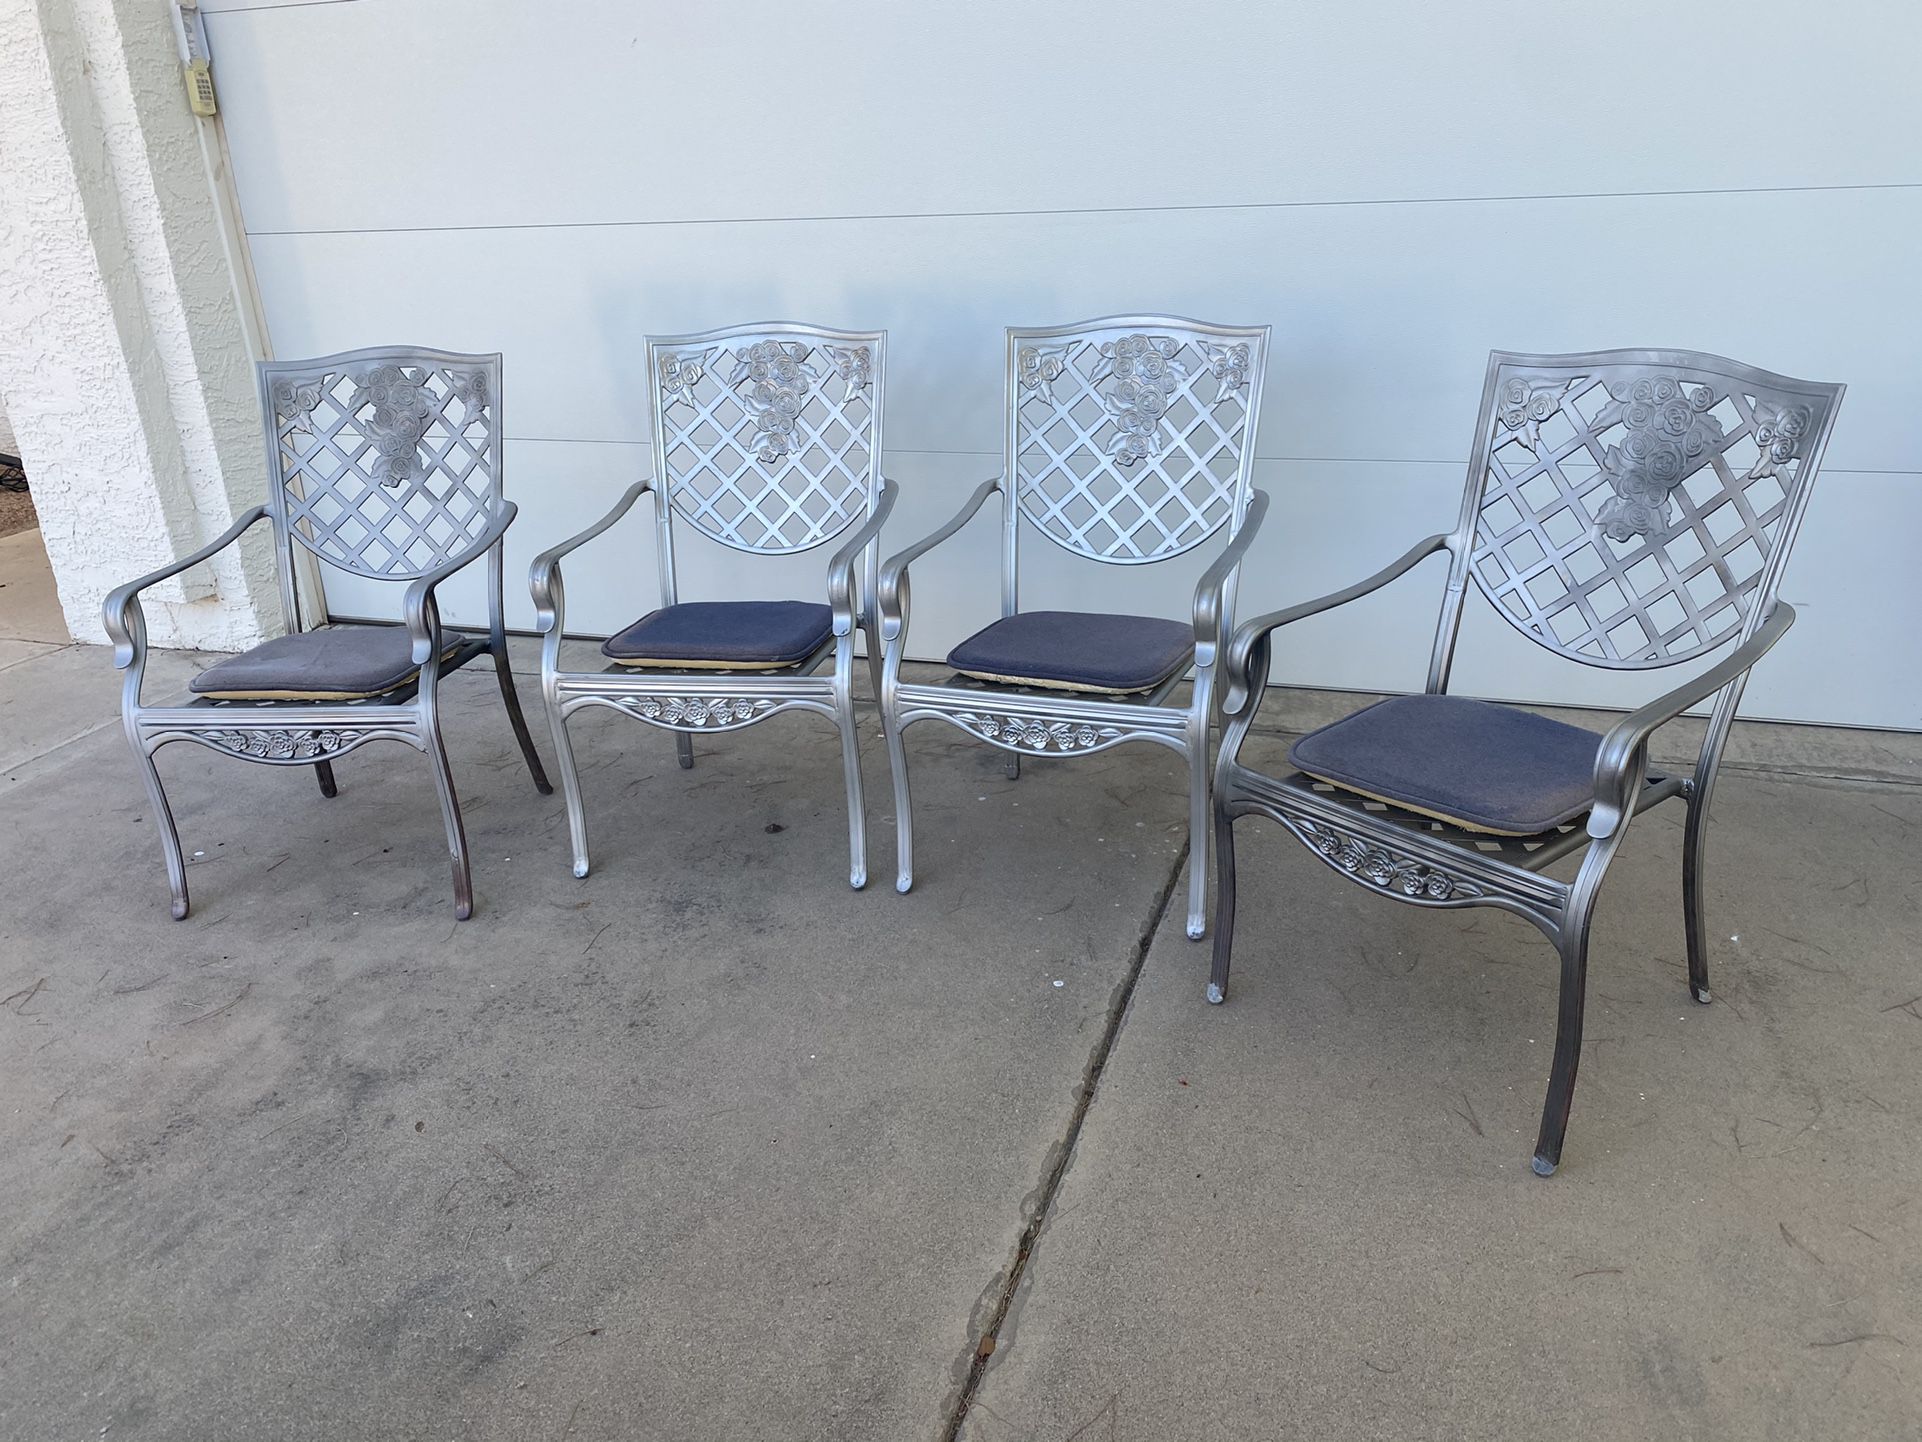 Four Outdoor Aluminum Patio Chairs With Memory Foam Cushions 